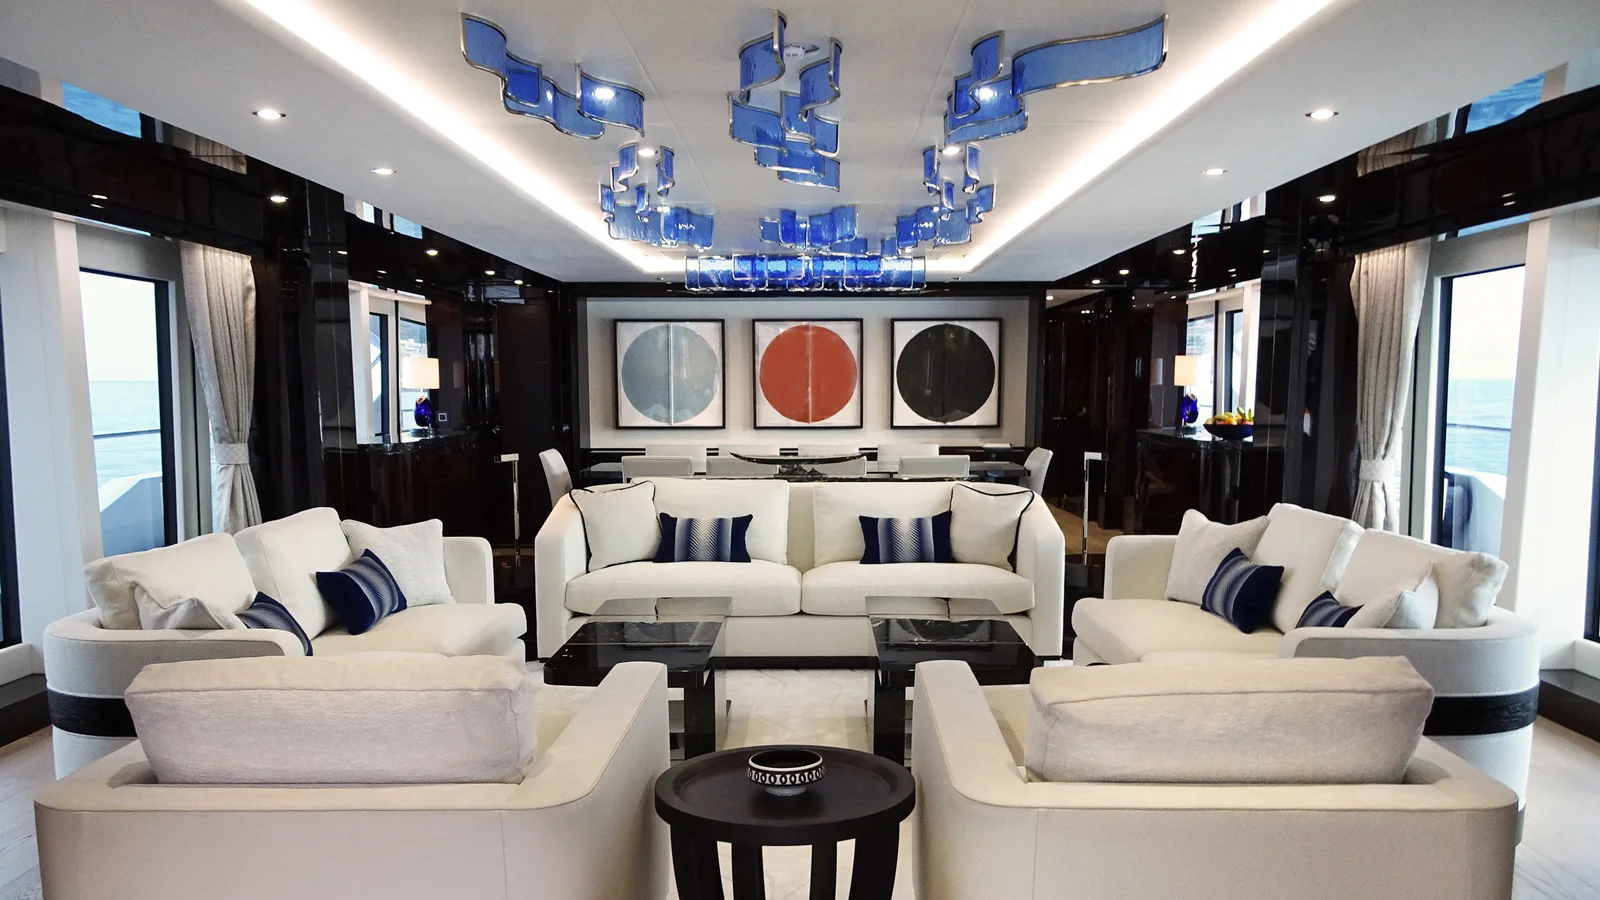 The interior design for new and particularly large boats is often created with the owner’s preferences in mind